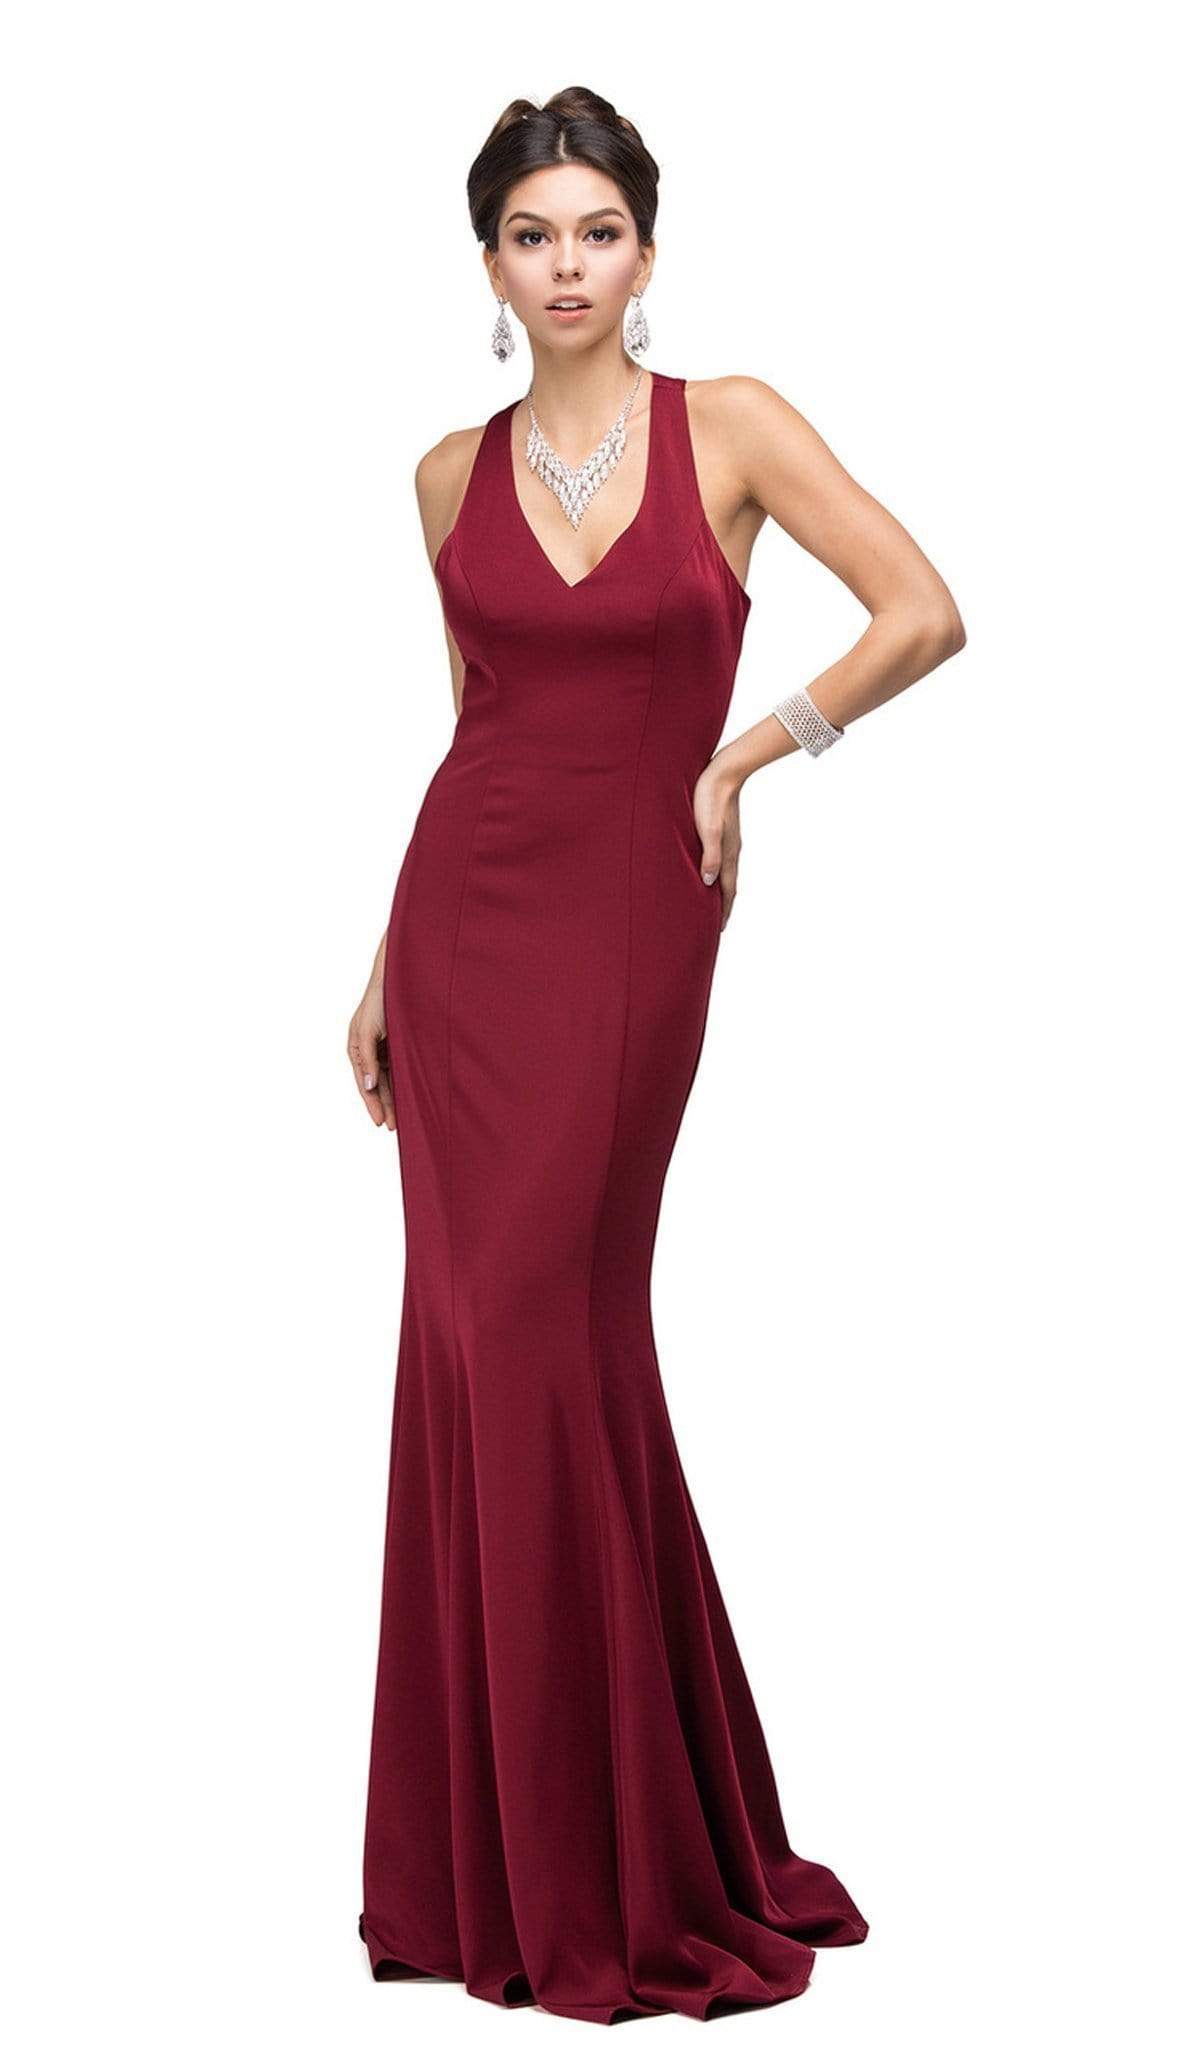 Dancing Queen - 9637 Magnificent V-Neck Racer Back Prom Dress Special Occasion Dress XS / Burgundy